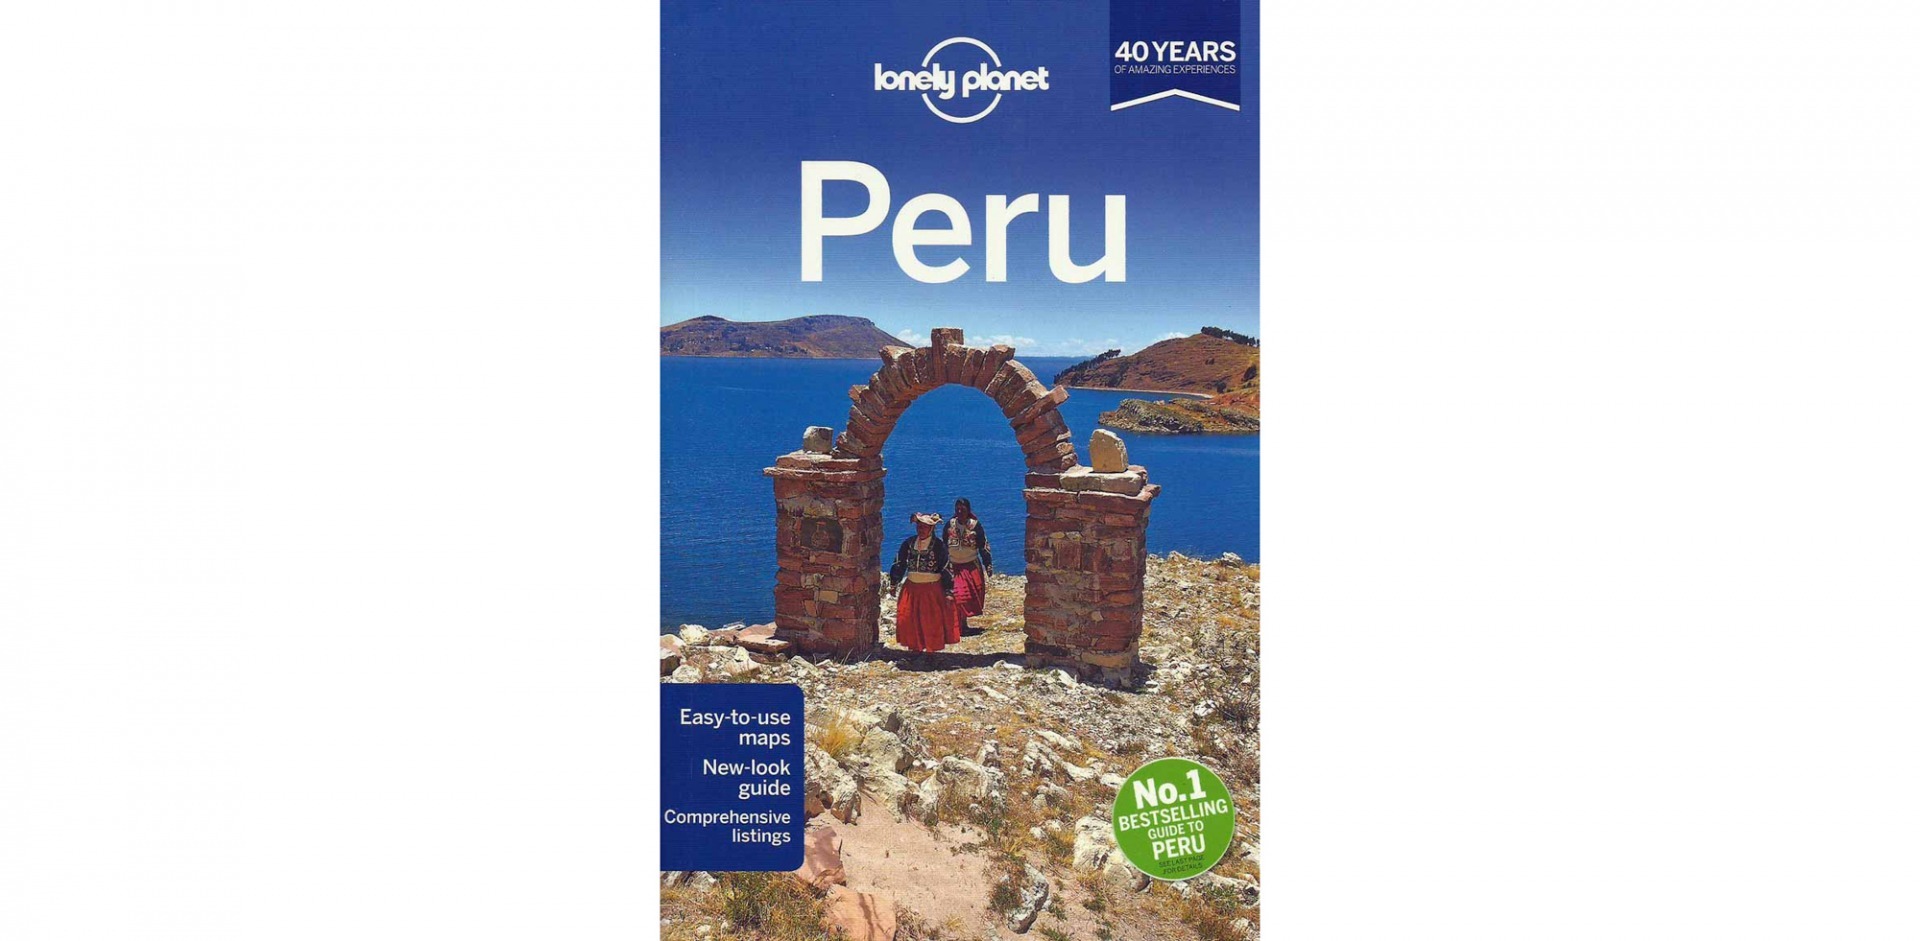 Lonely Planet Peru - Aspiring now listed, about time!